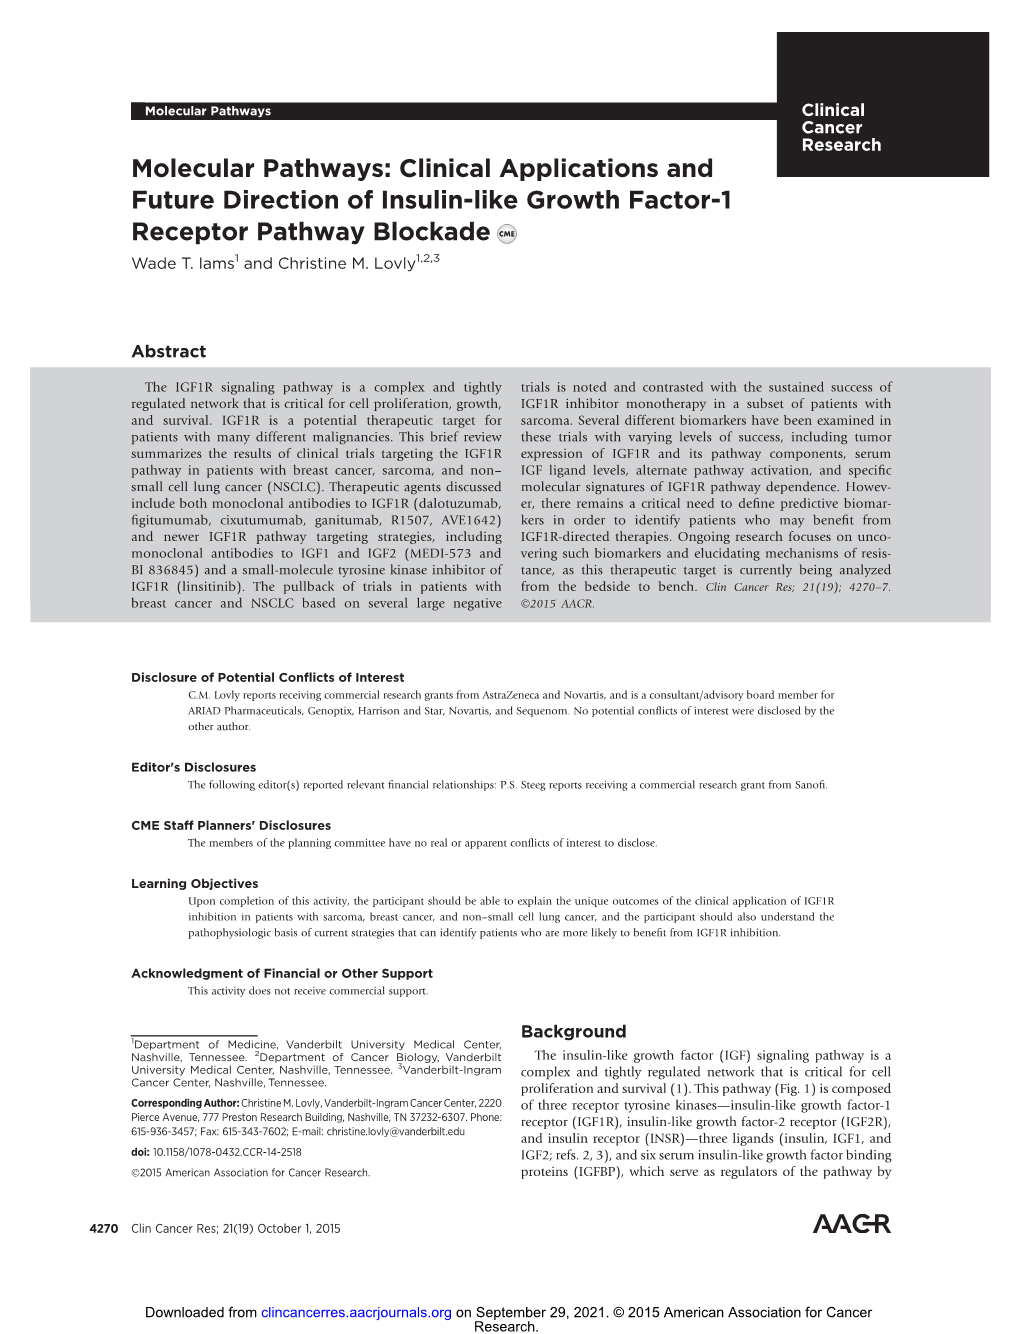 Clinical Applications and Future Direction of Insulin-Like Growth Factor-1 Receptor Pathway Blockade Wade T